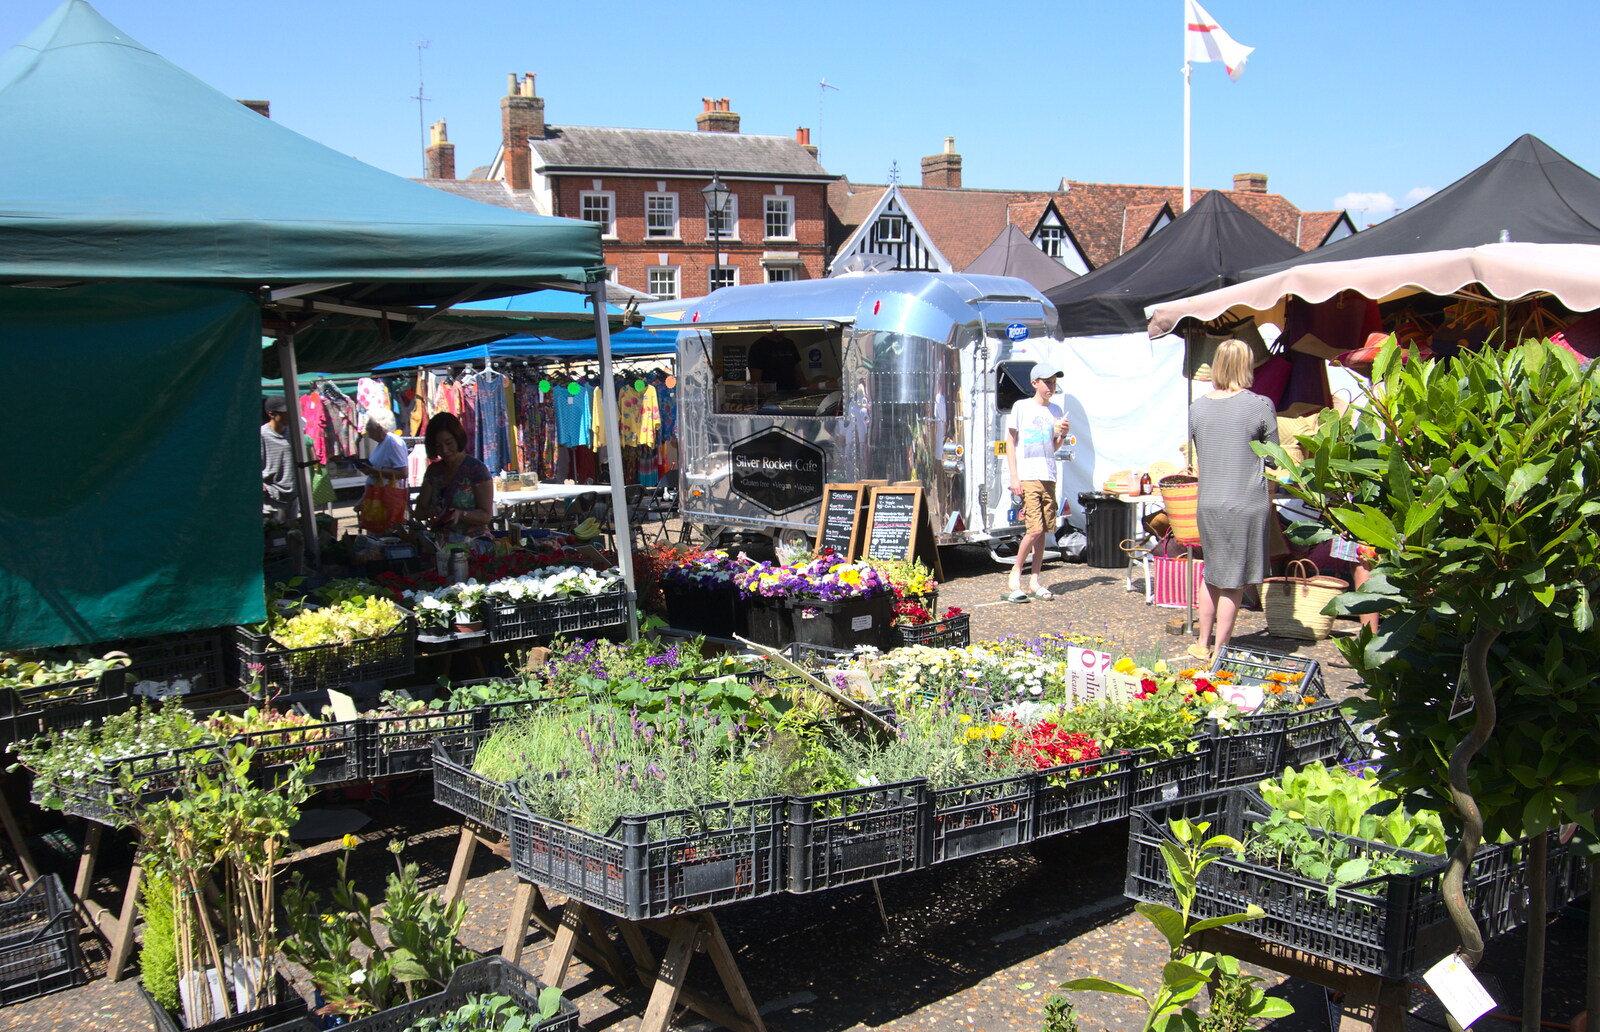 Framlingham market, and the plant stall from A Postcard from the Castle on the Hill, Framlingham, Suffolk - 14th July 2018